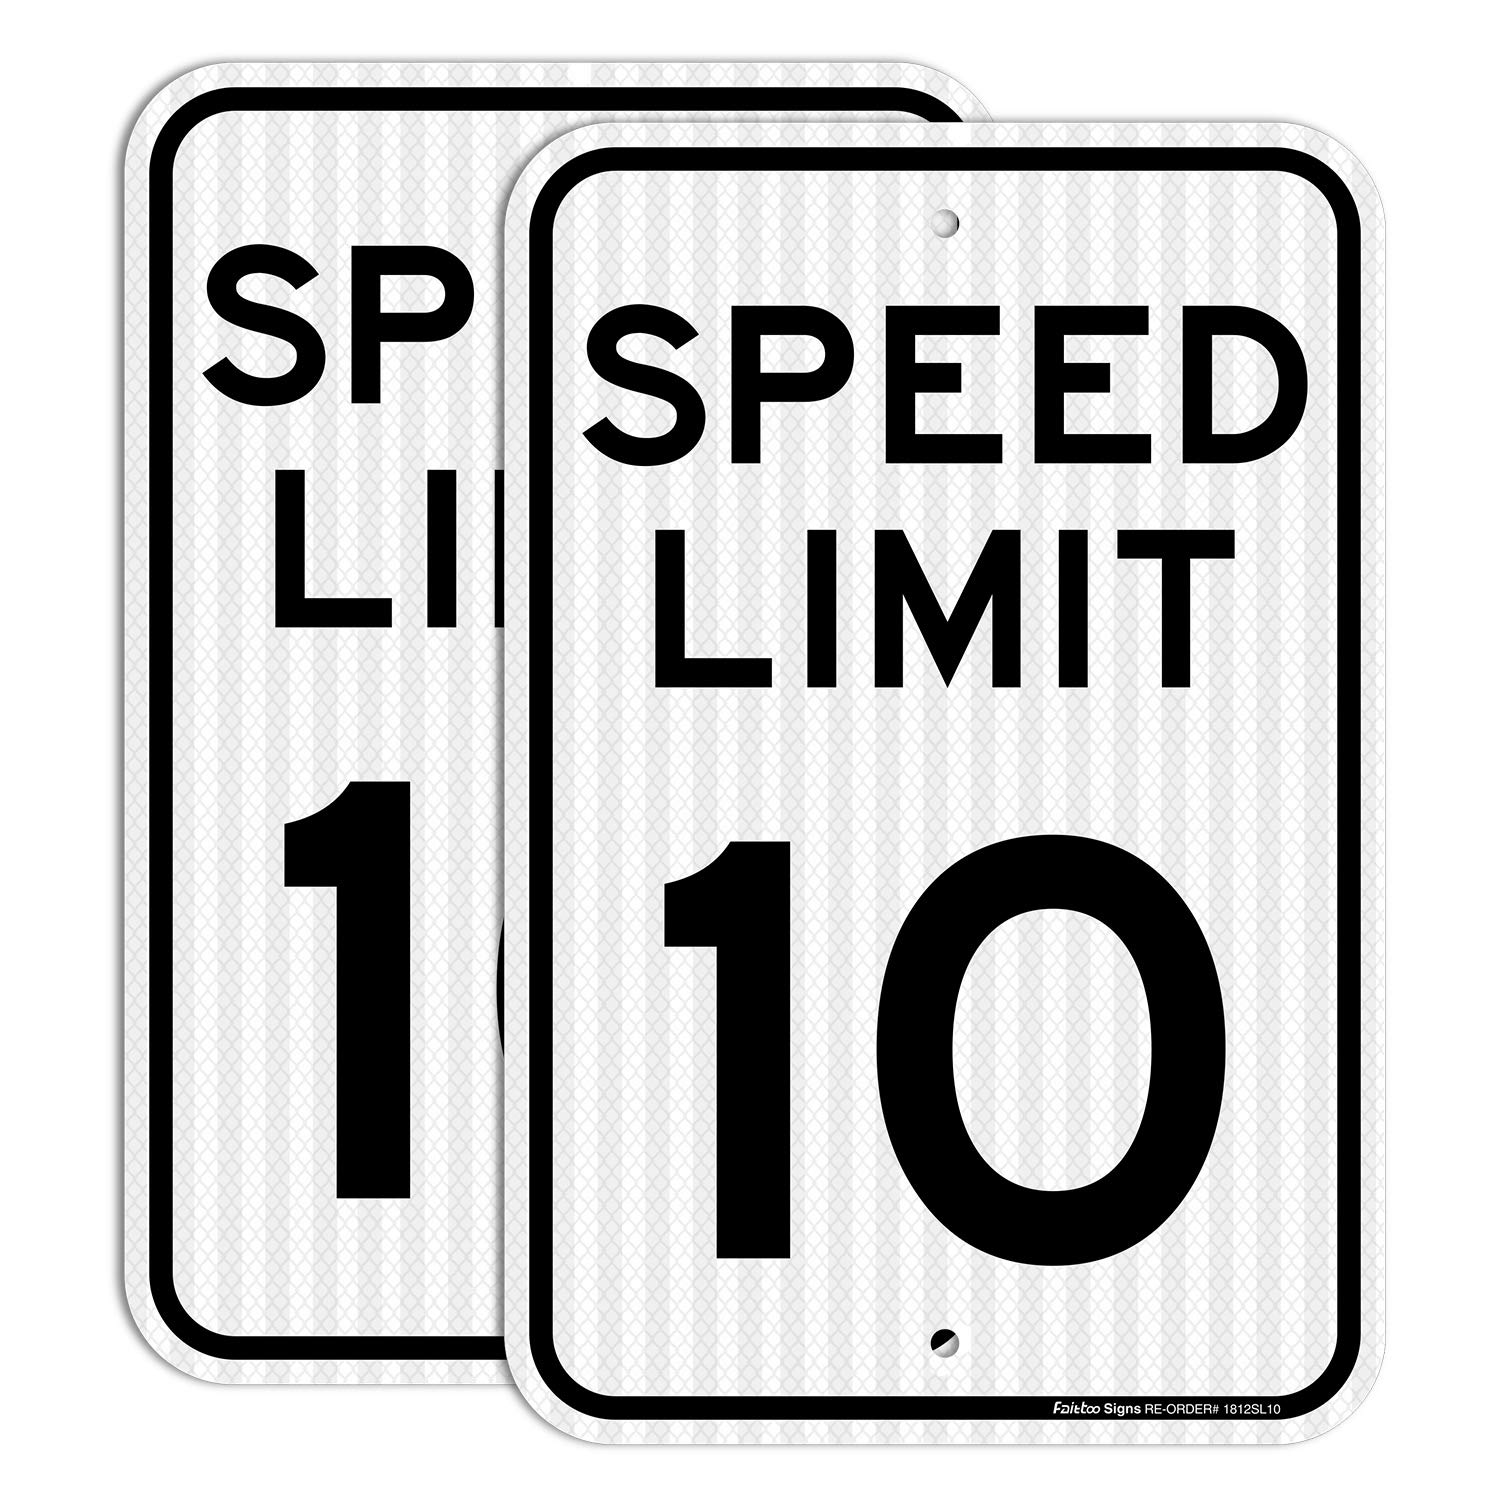 (2 Pack) Speed Limit 10 MPH Sign, 18 x 12 Inches Engineer Grade Reflective Sheeting, Rust Free Aluminum, Weather Resistant, Waterproof, Durable Ink, Easy to Mount